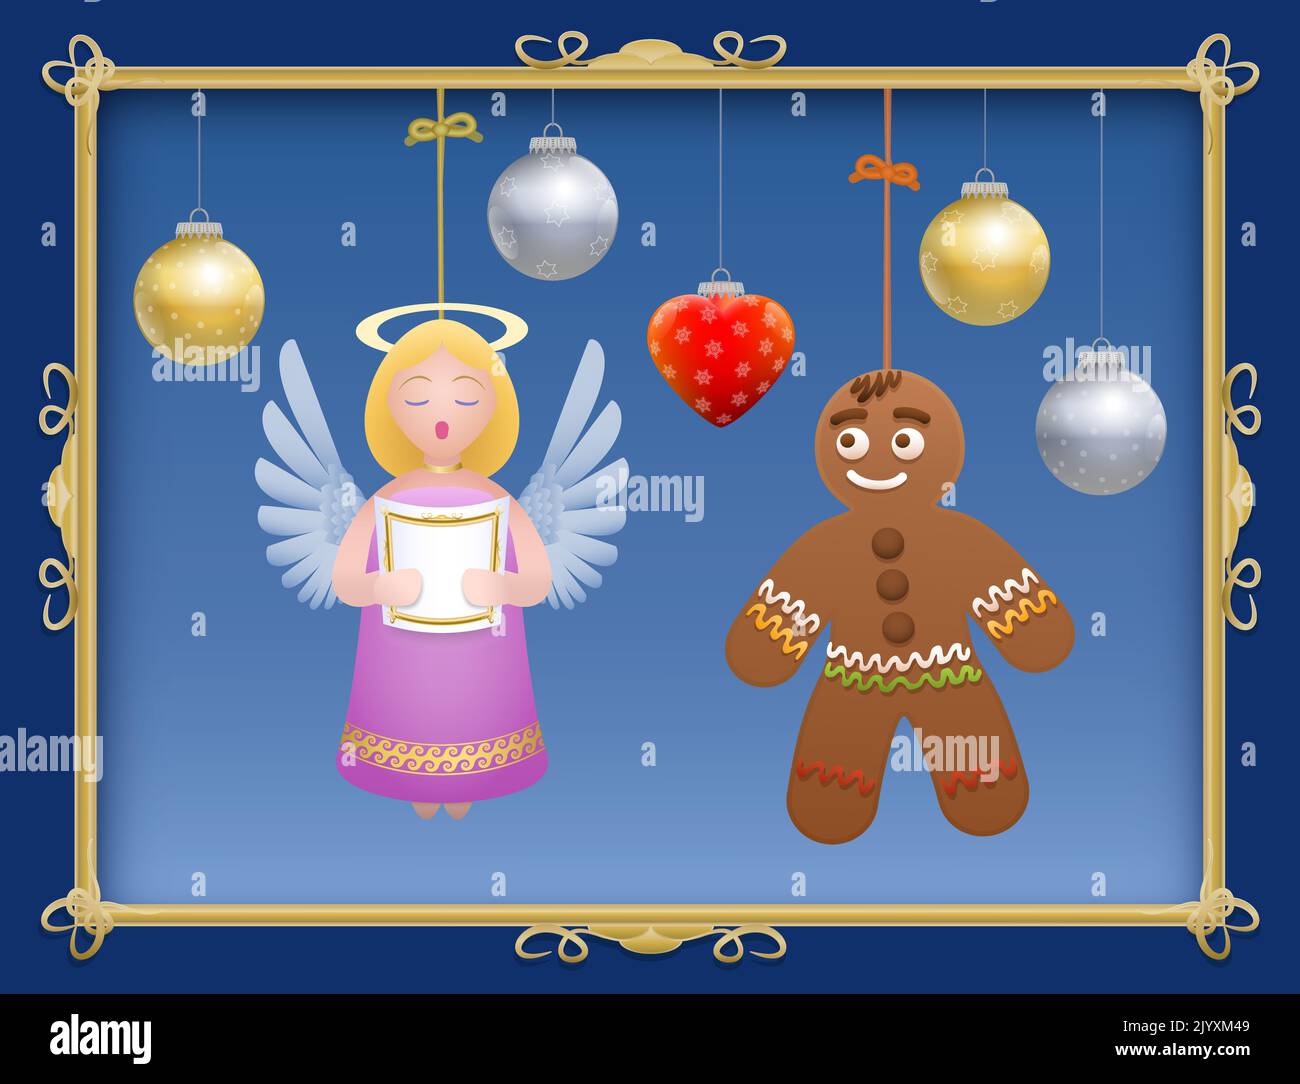 Gingerbread man in love with singing angel, hanging christmas balls and heart decoration, golden frame. Stock Photo